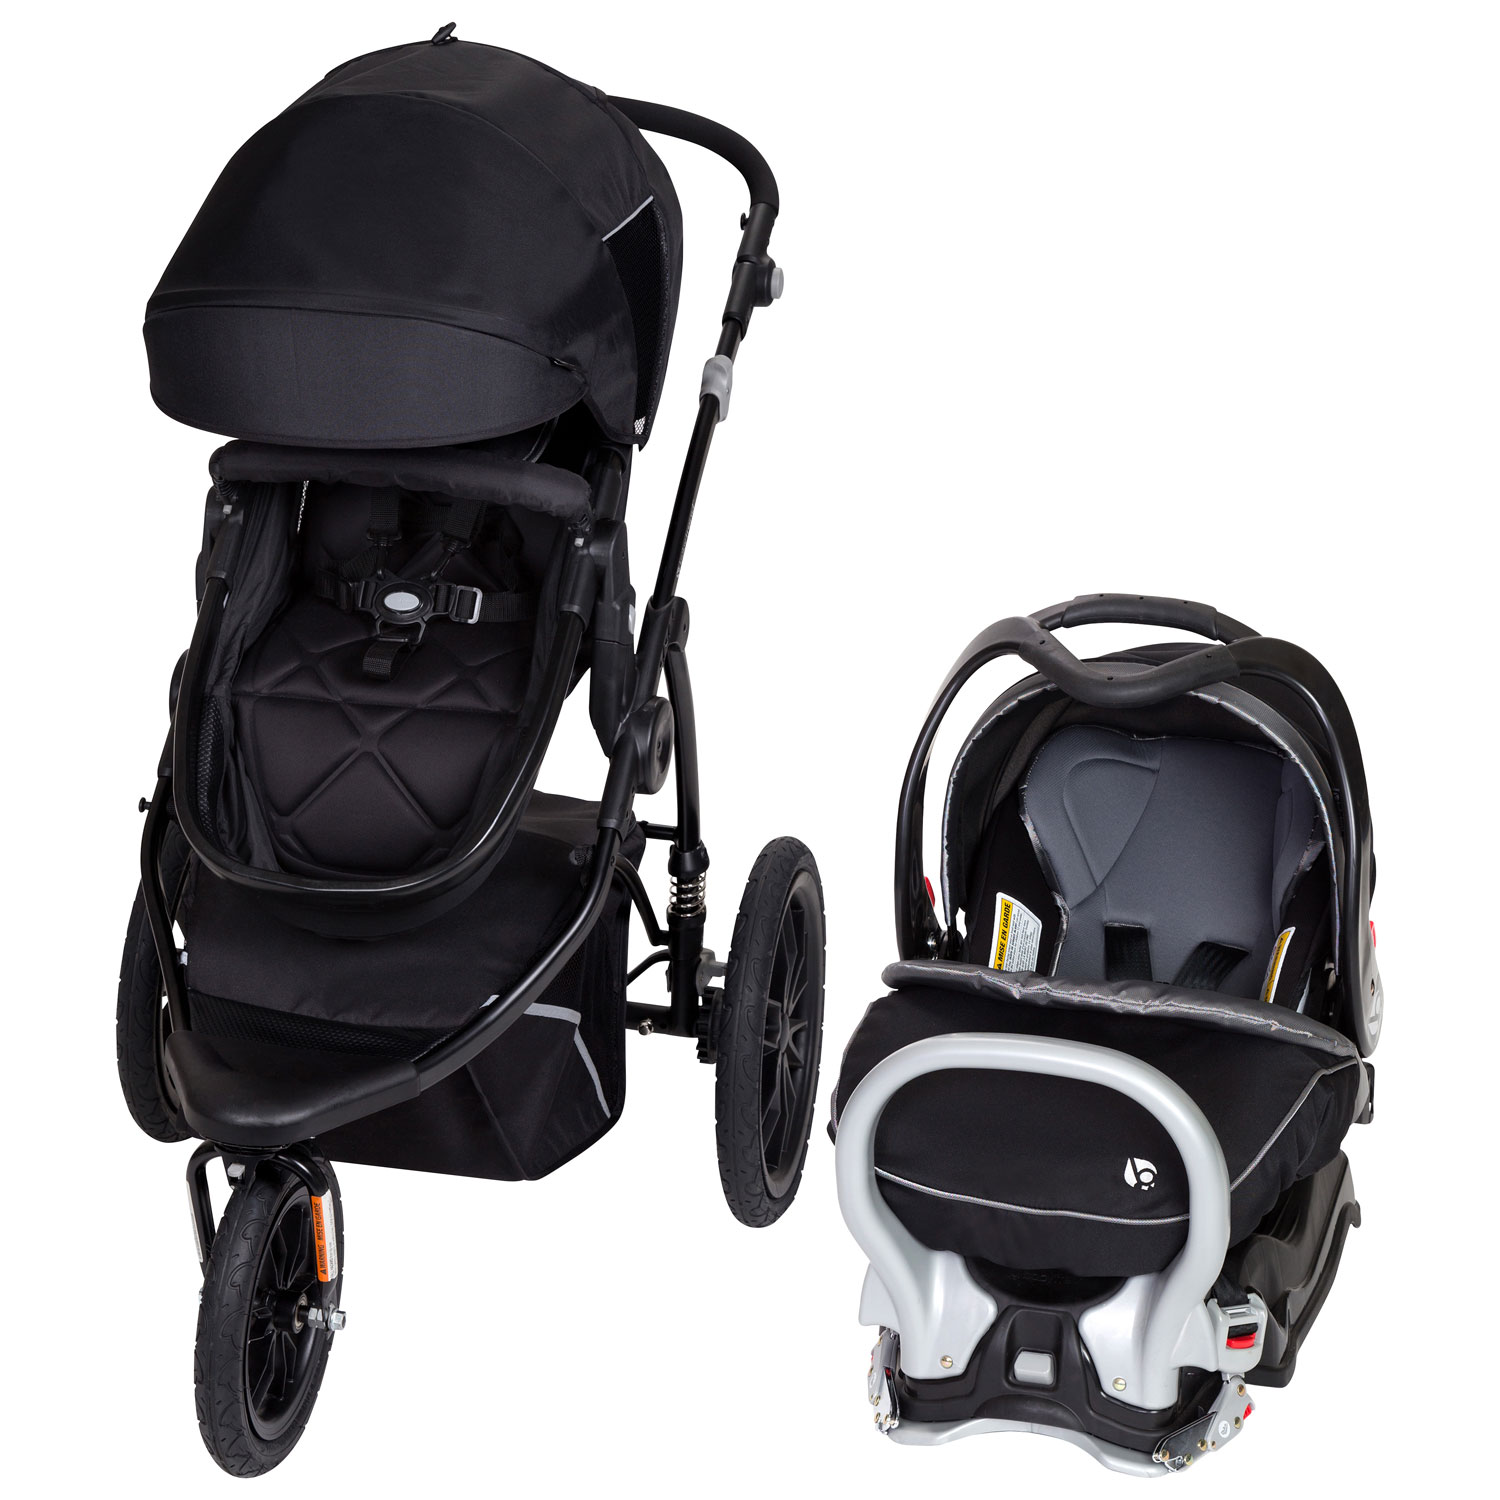 [View 21+] Baby Trend Jogging Stroller With Car Seat - Amercan Apparel